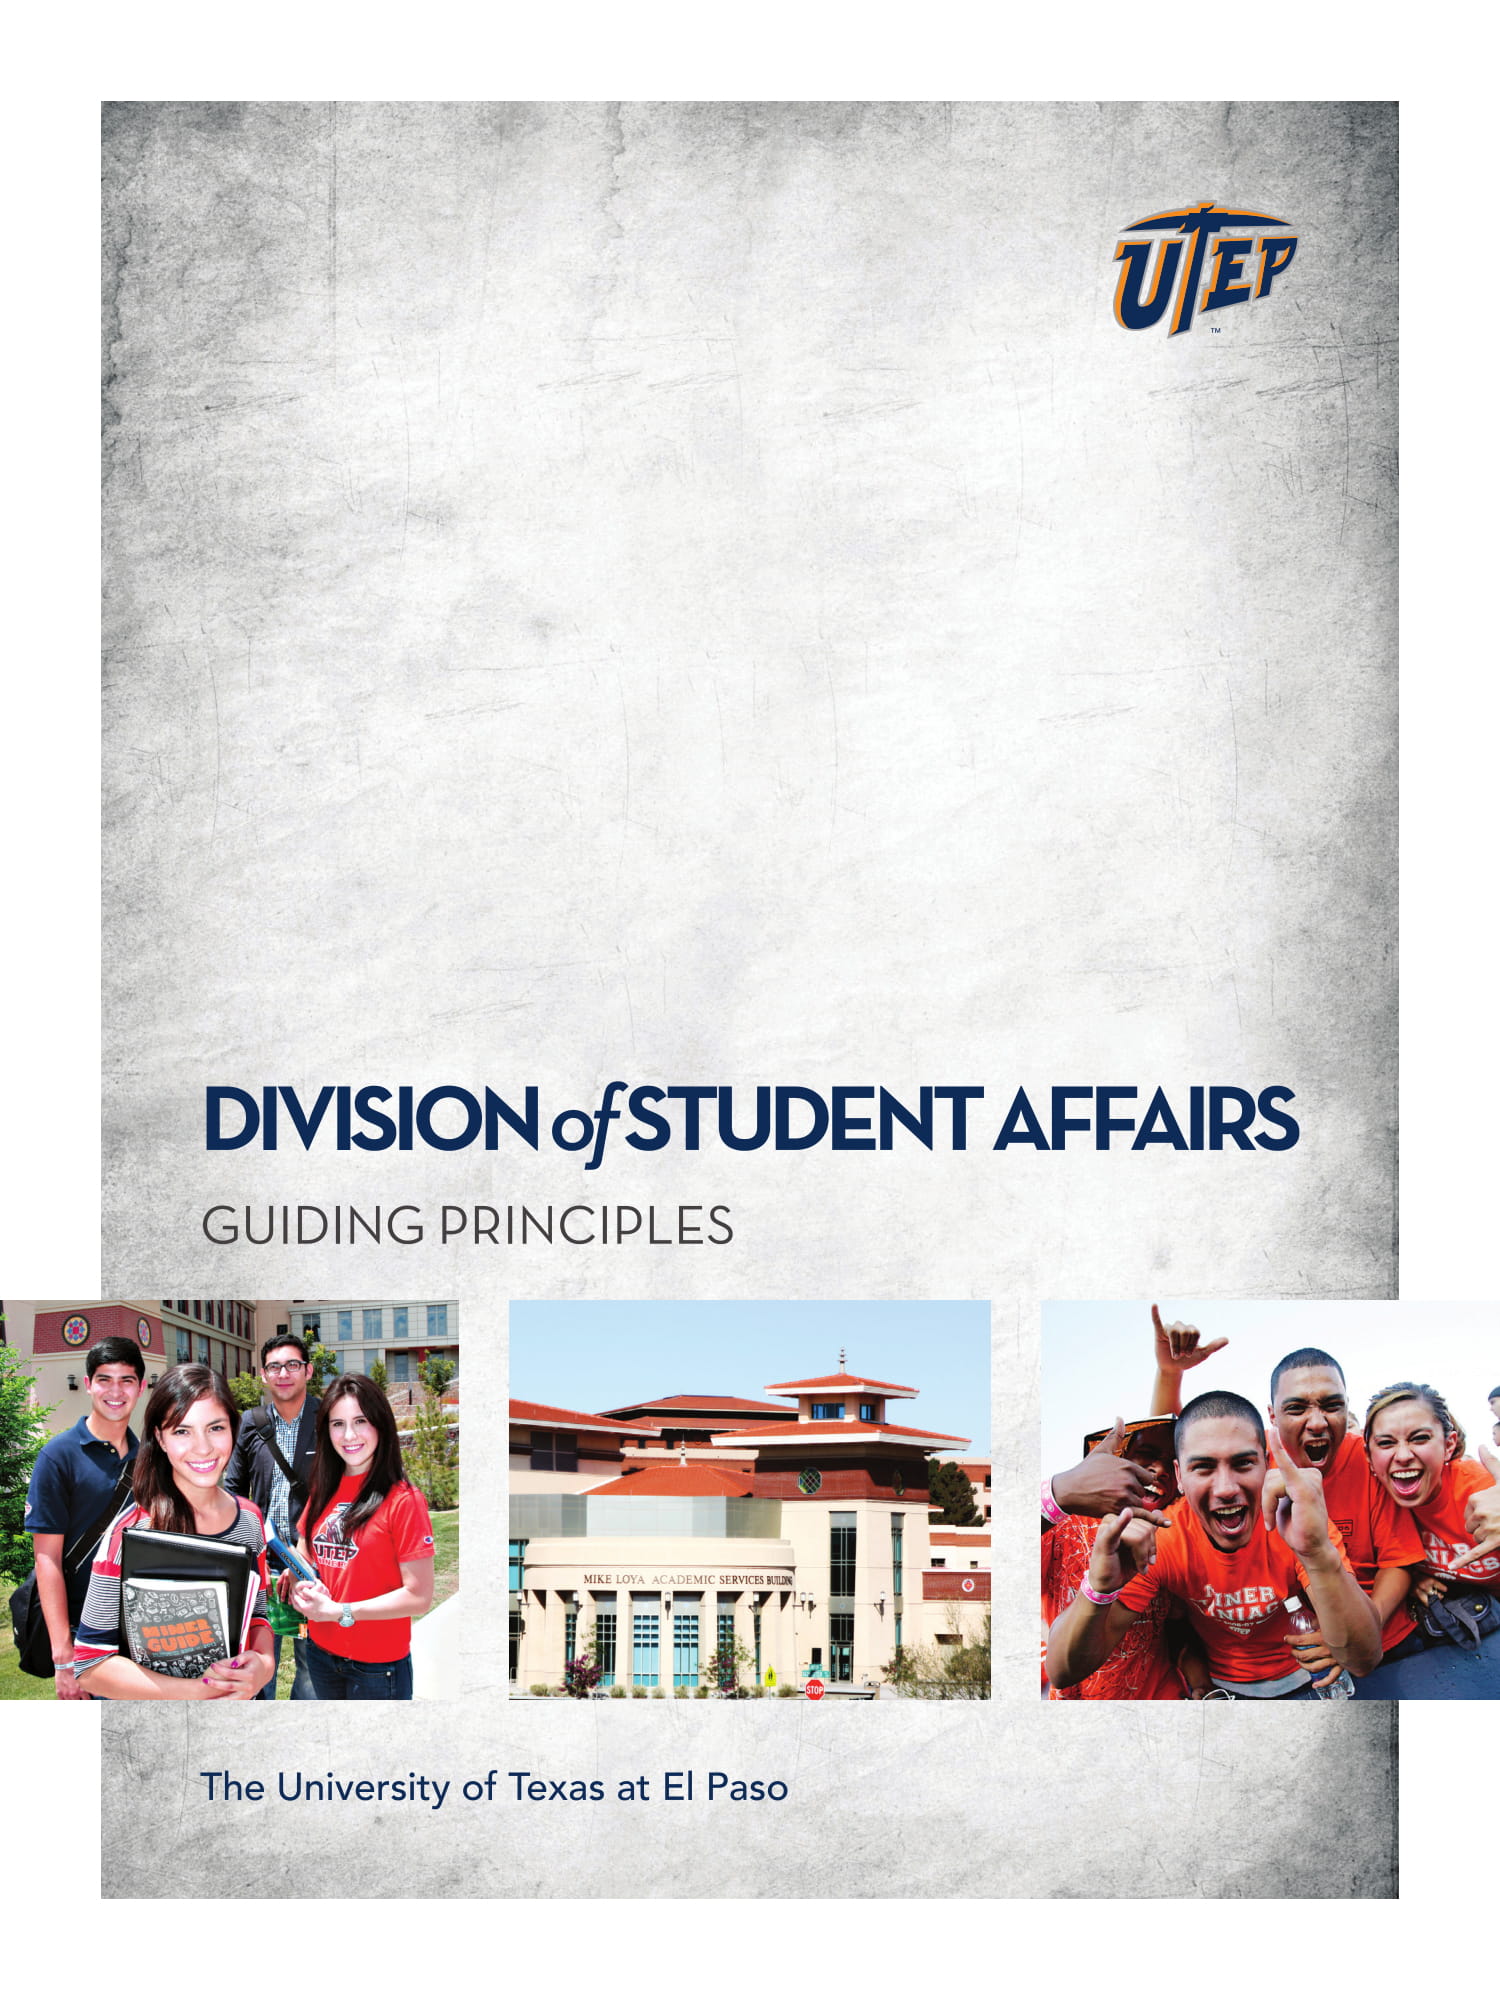 Division of Student Affairs Organizational Chart